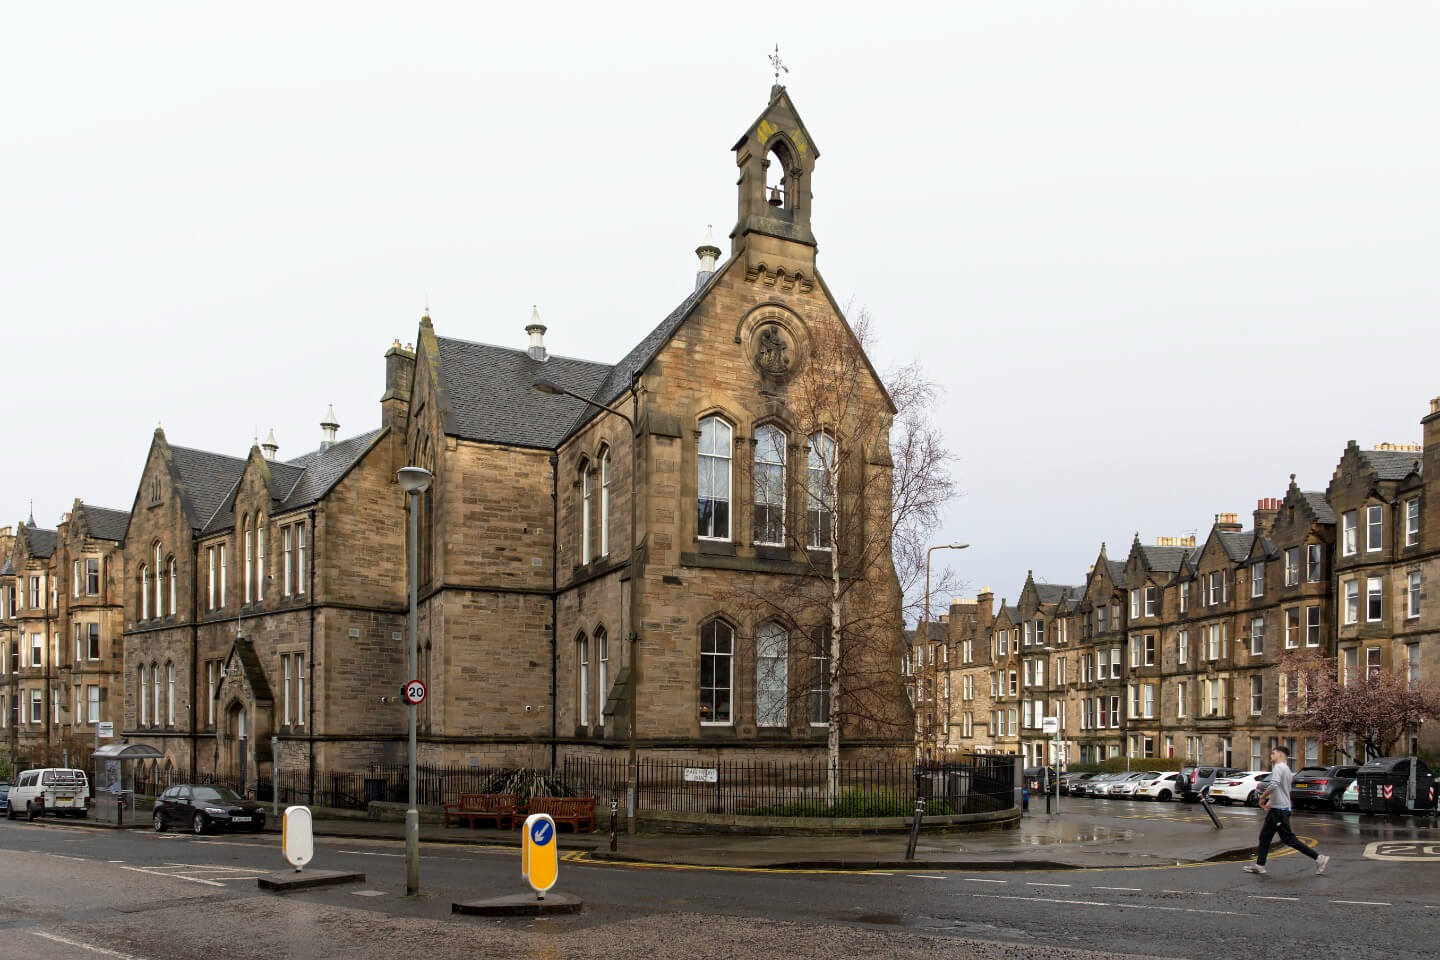 Student Accommodation in Marchmont, Edinburgh - church on the corner of Marchmont Road